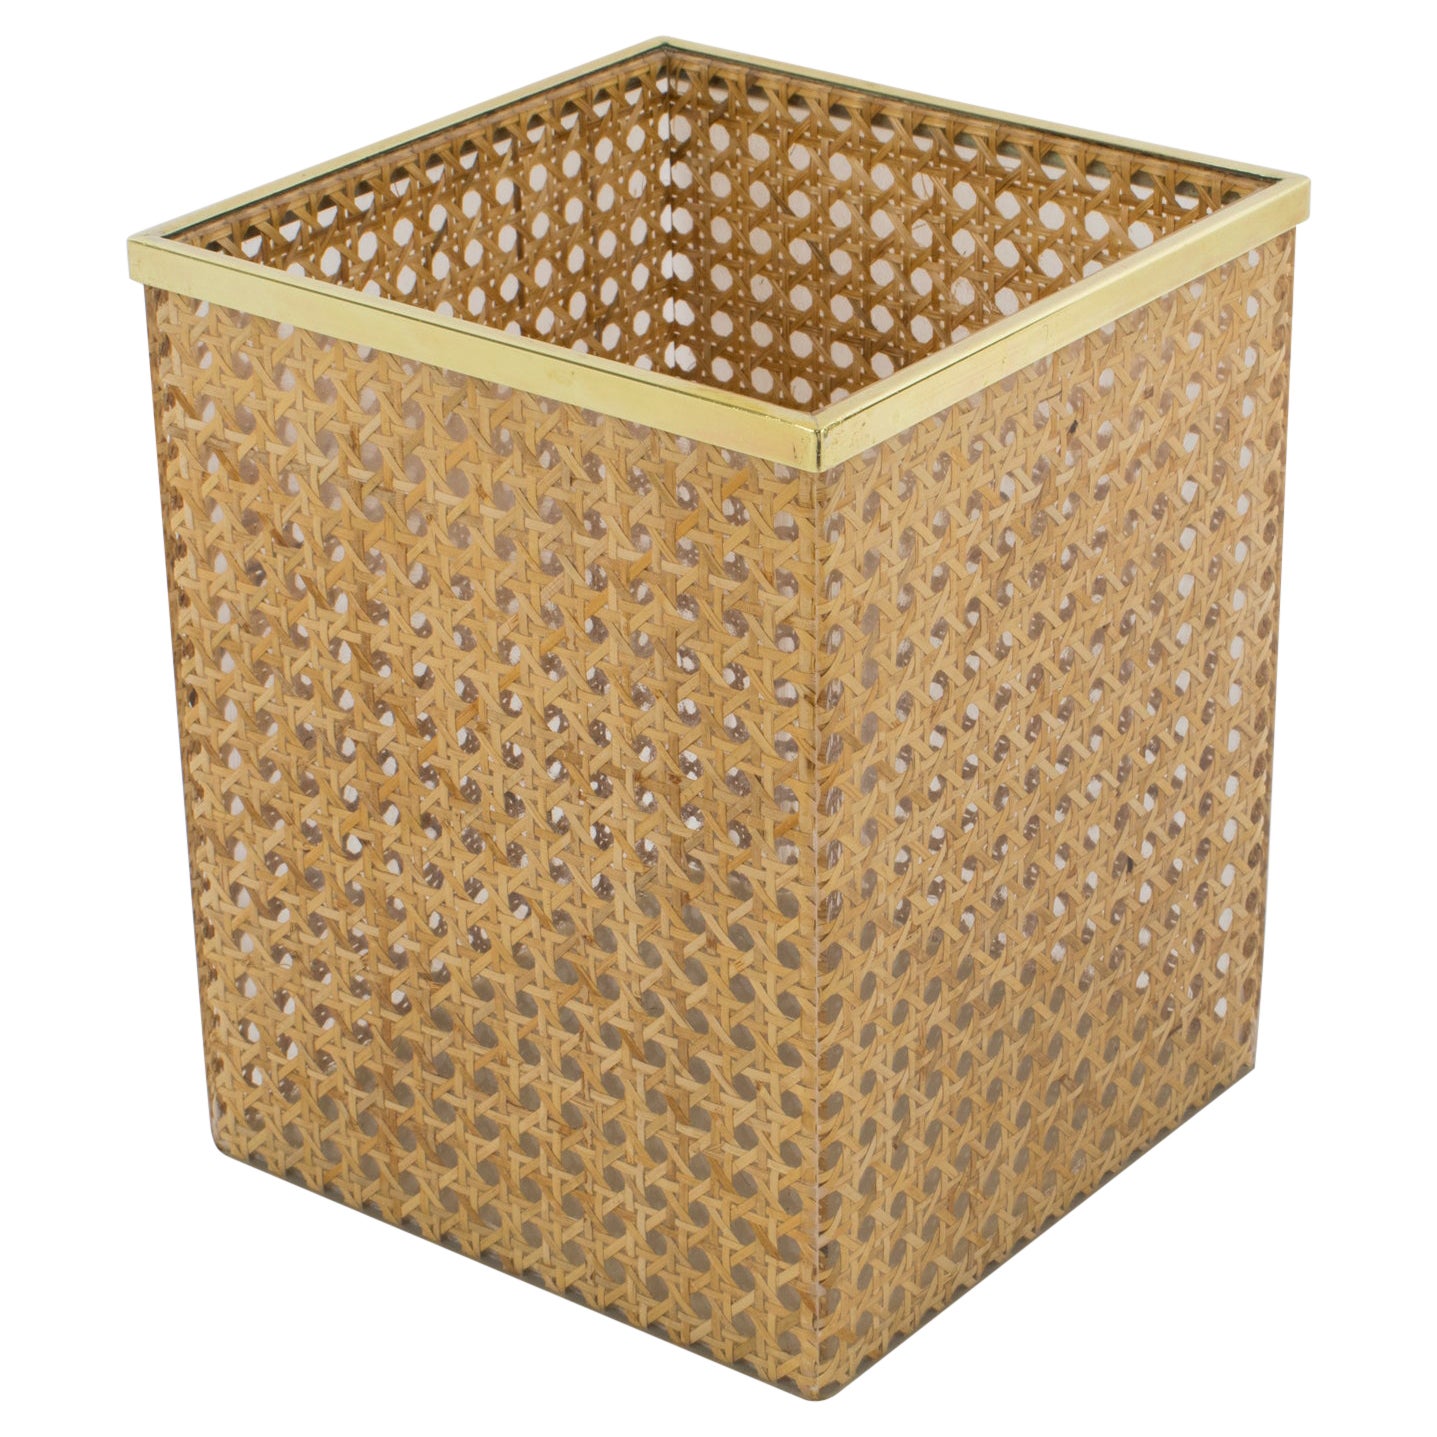 Christian Dior Home Collection Lucite and Rattan WasteBasket or Planter, 1970s